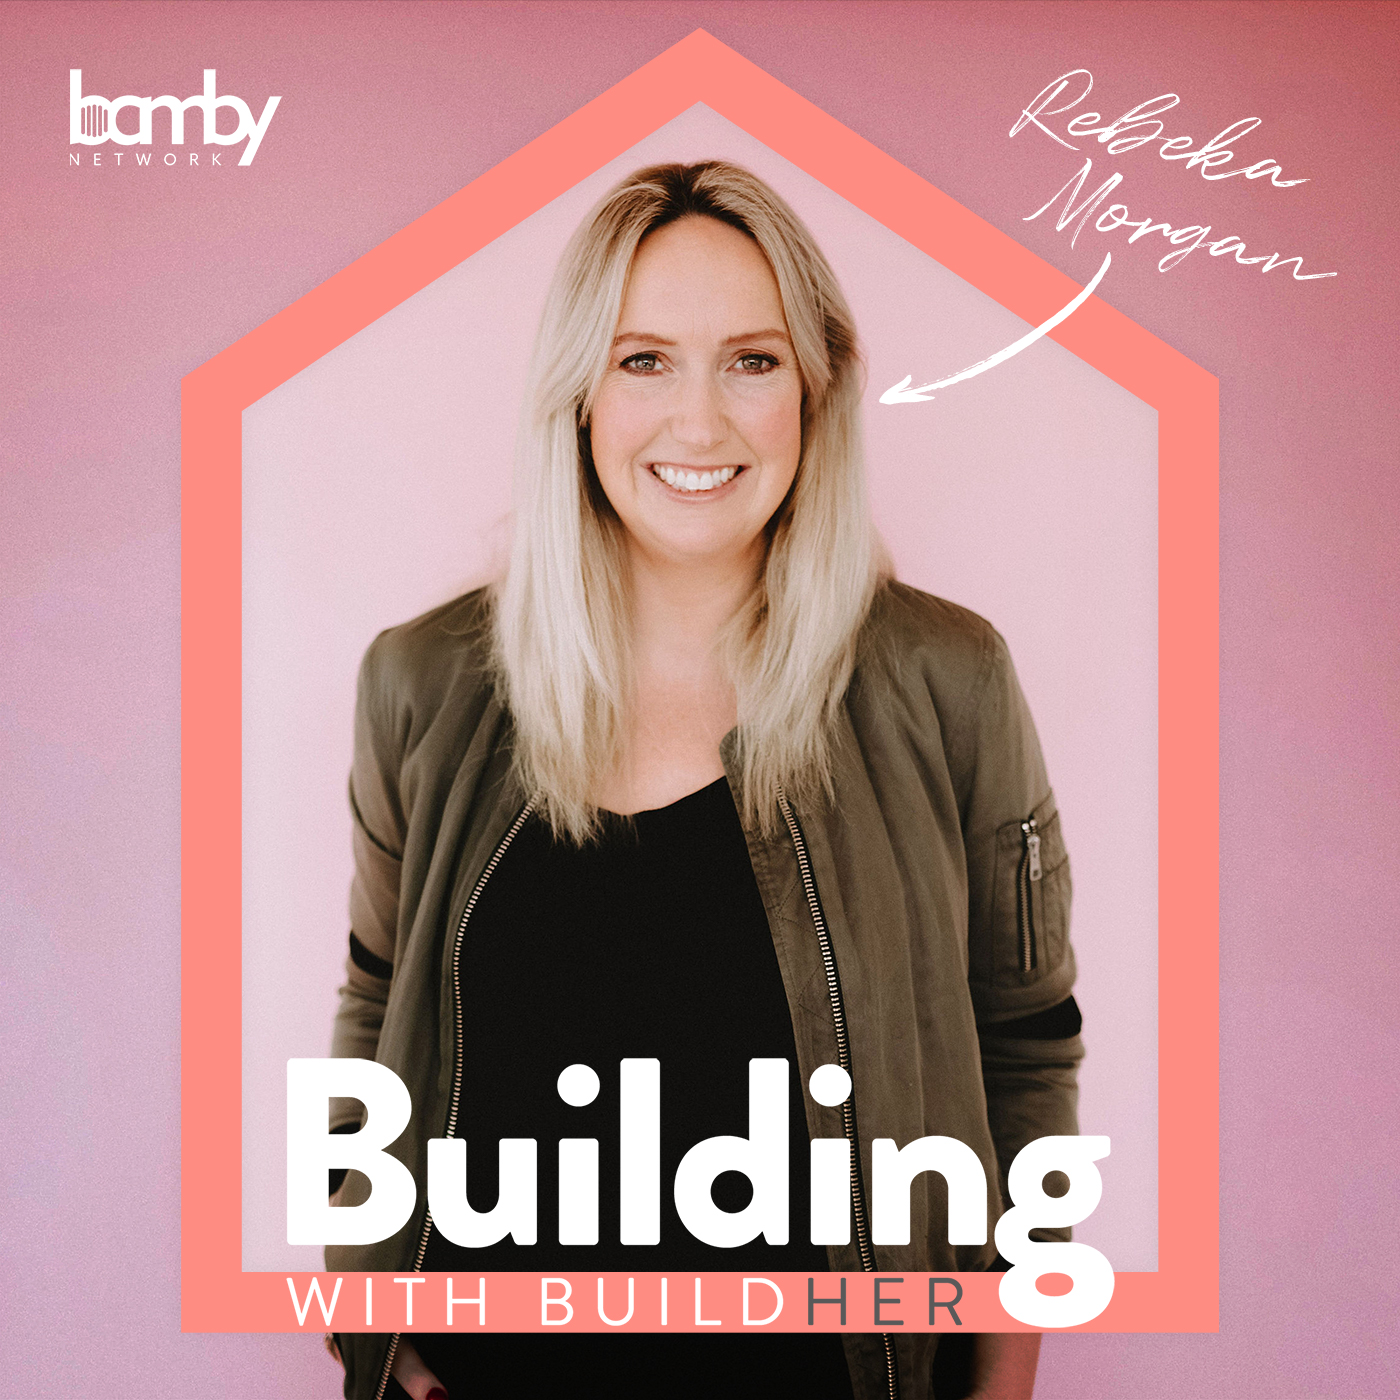 Making your home built for health with Building Biologist, Megan Zigomanis